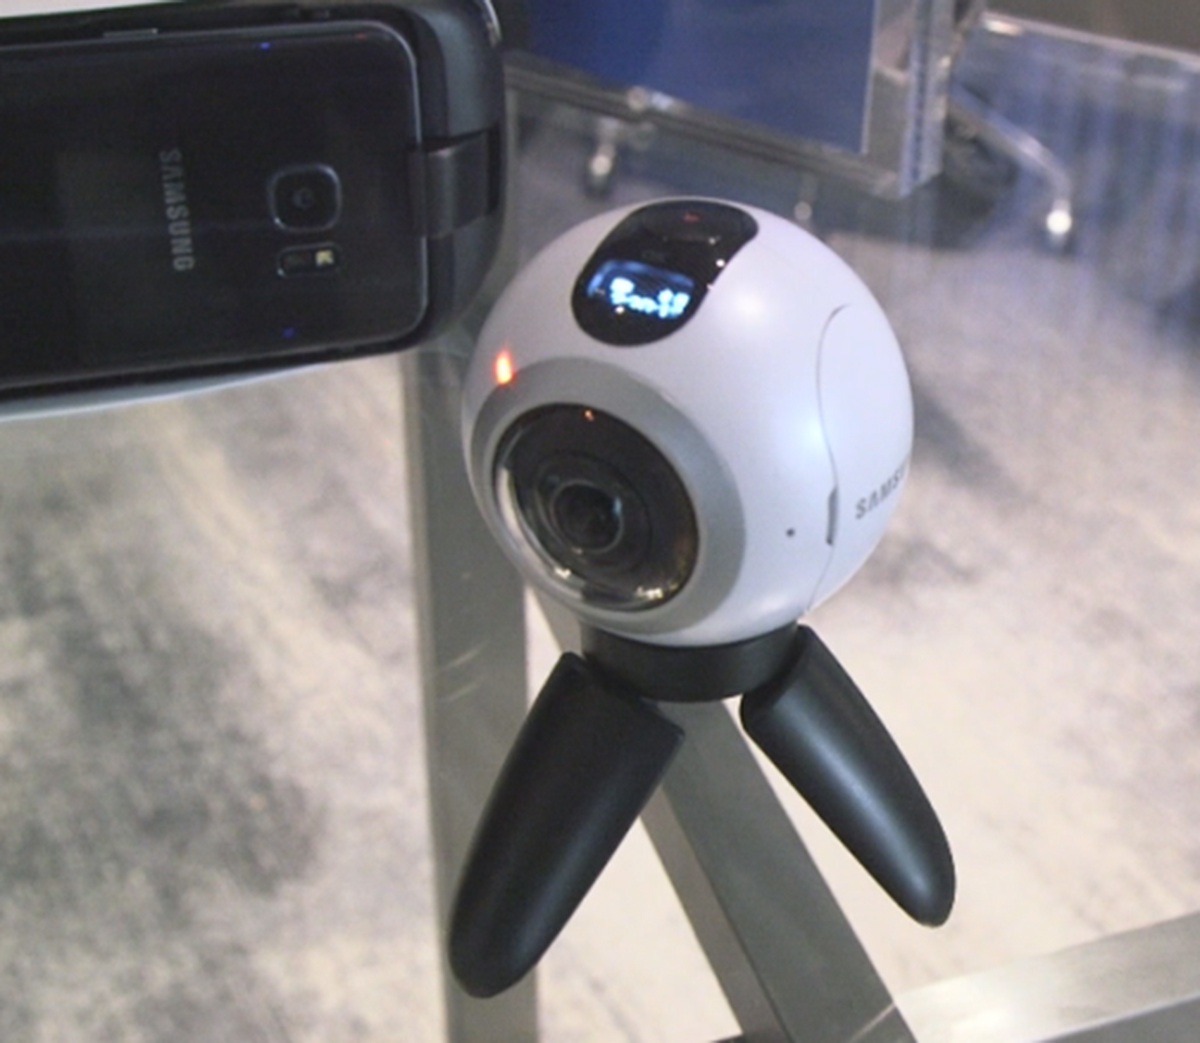 PHOTO: Samsung's new Gear360 virtual reality camera is seen in this photo